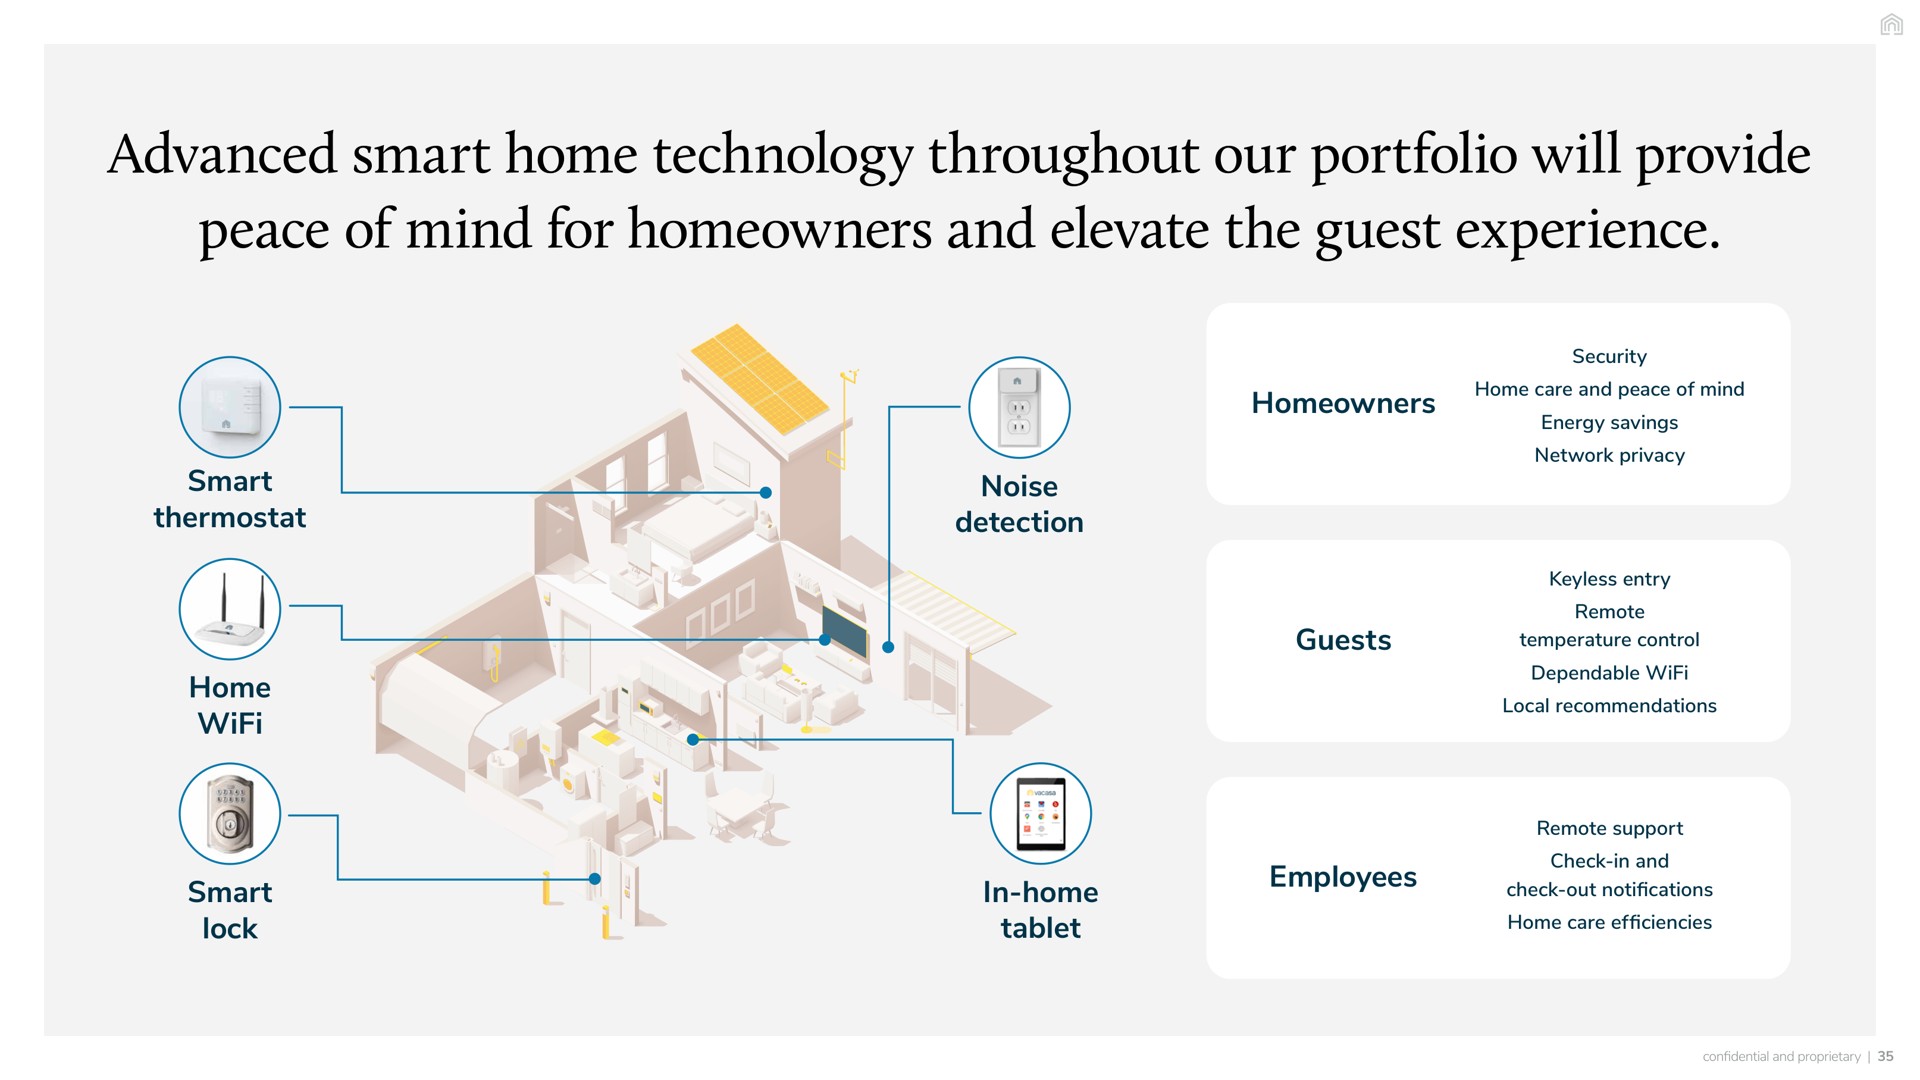 advanced smart home technology throughout our portfolio will provide peace of mind for homeowners and elevate the guest experience thermostat noise detection security care energy savings network privacy he guests keyless entry remote temperature control dependable local recommendations in home tablet employees remote support check in check out notifications care efficiencies lock | Vacasa